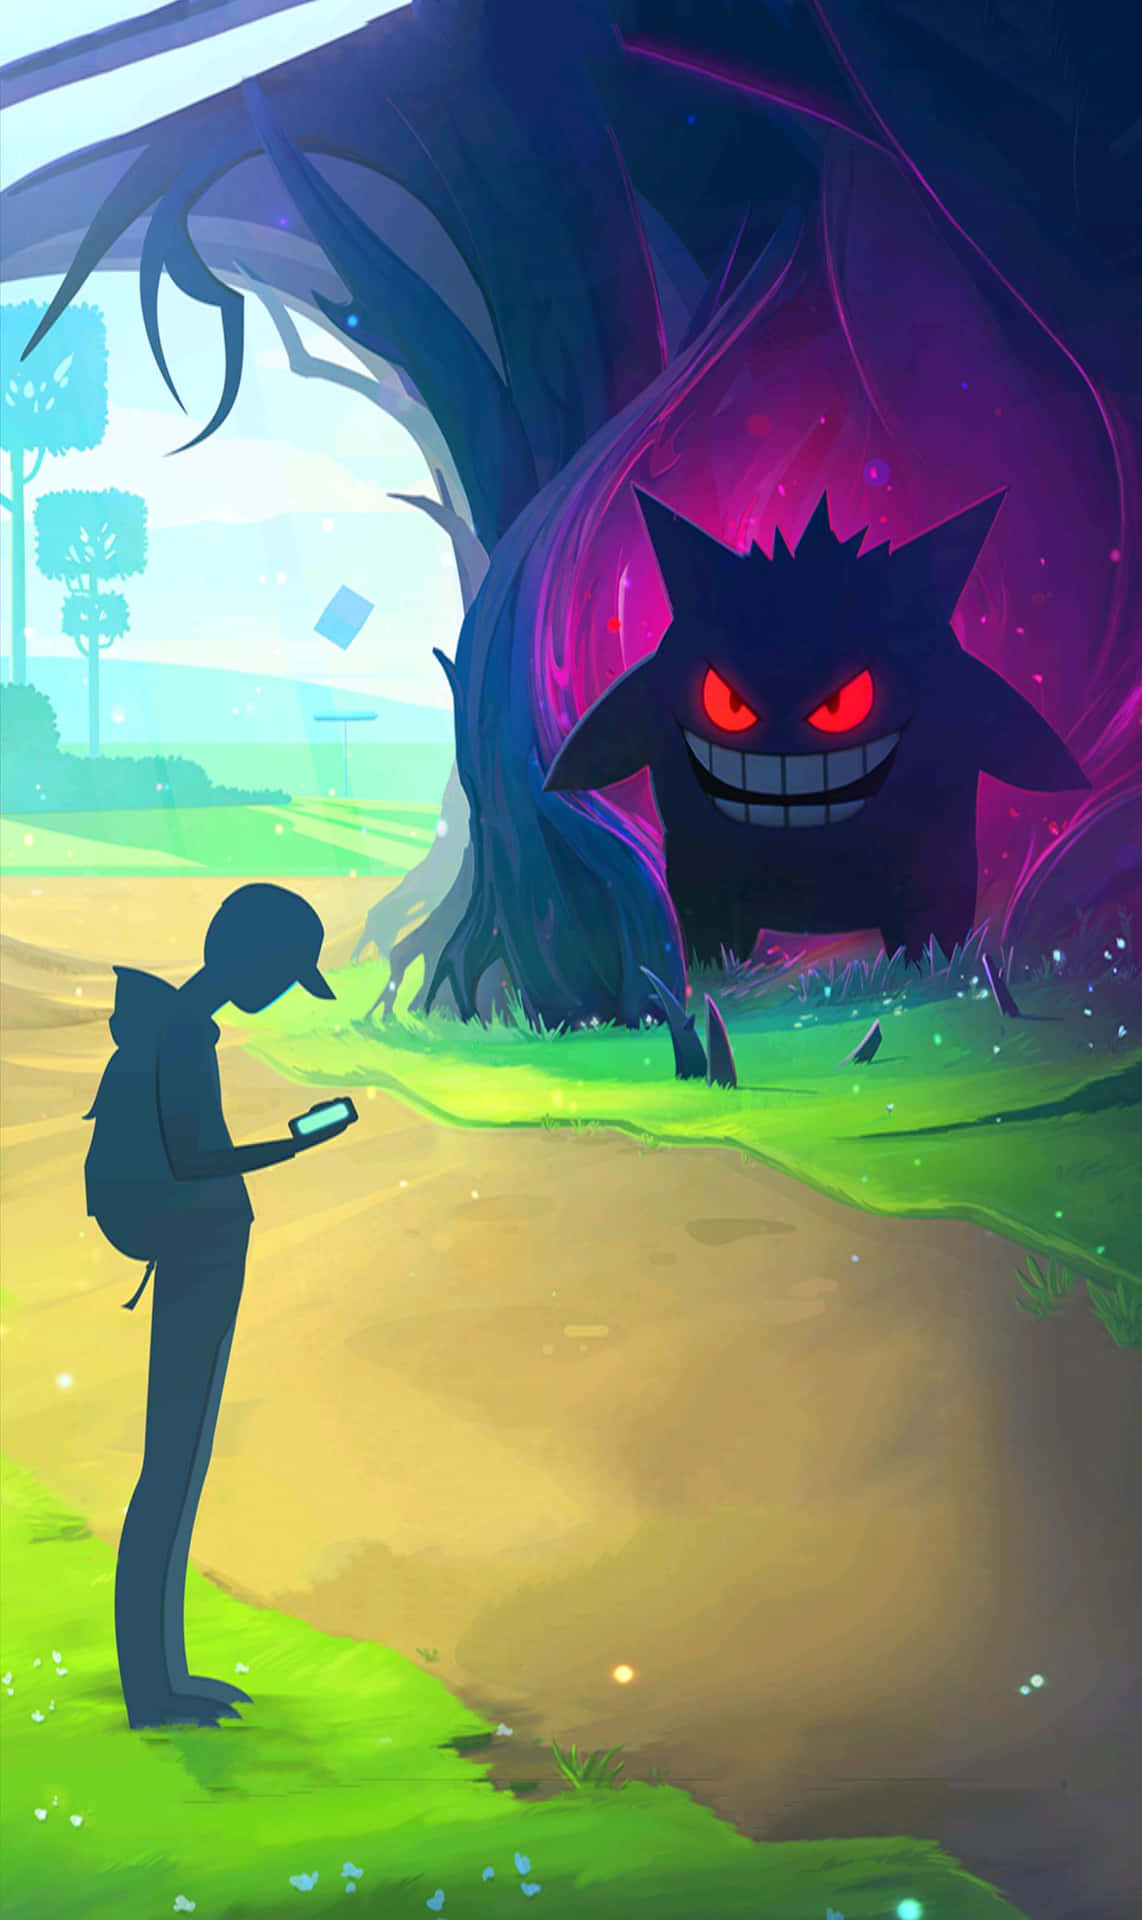 Get in the spirit of the spooky season with this festive take on Pokemon-Halloween! Wallpaper